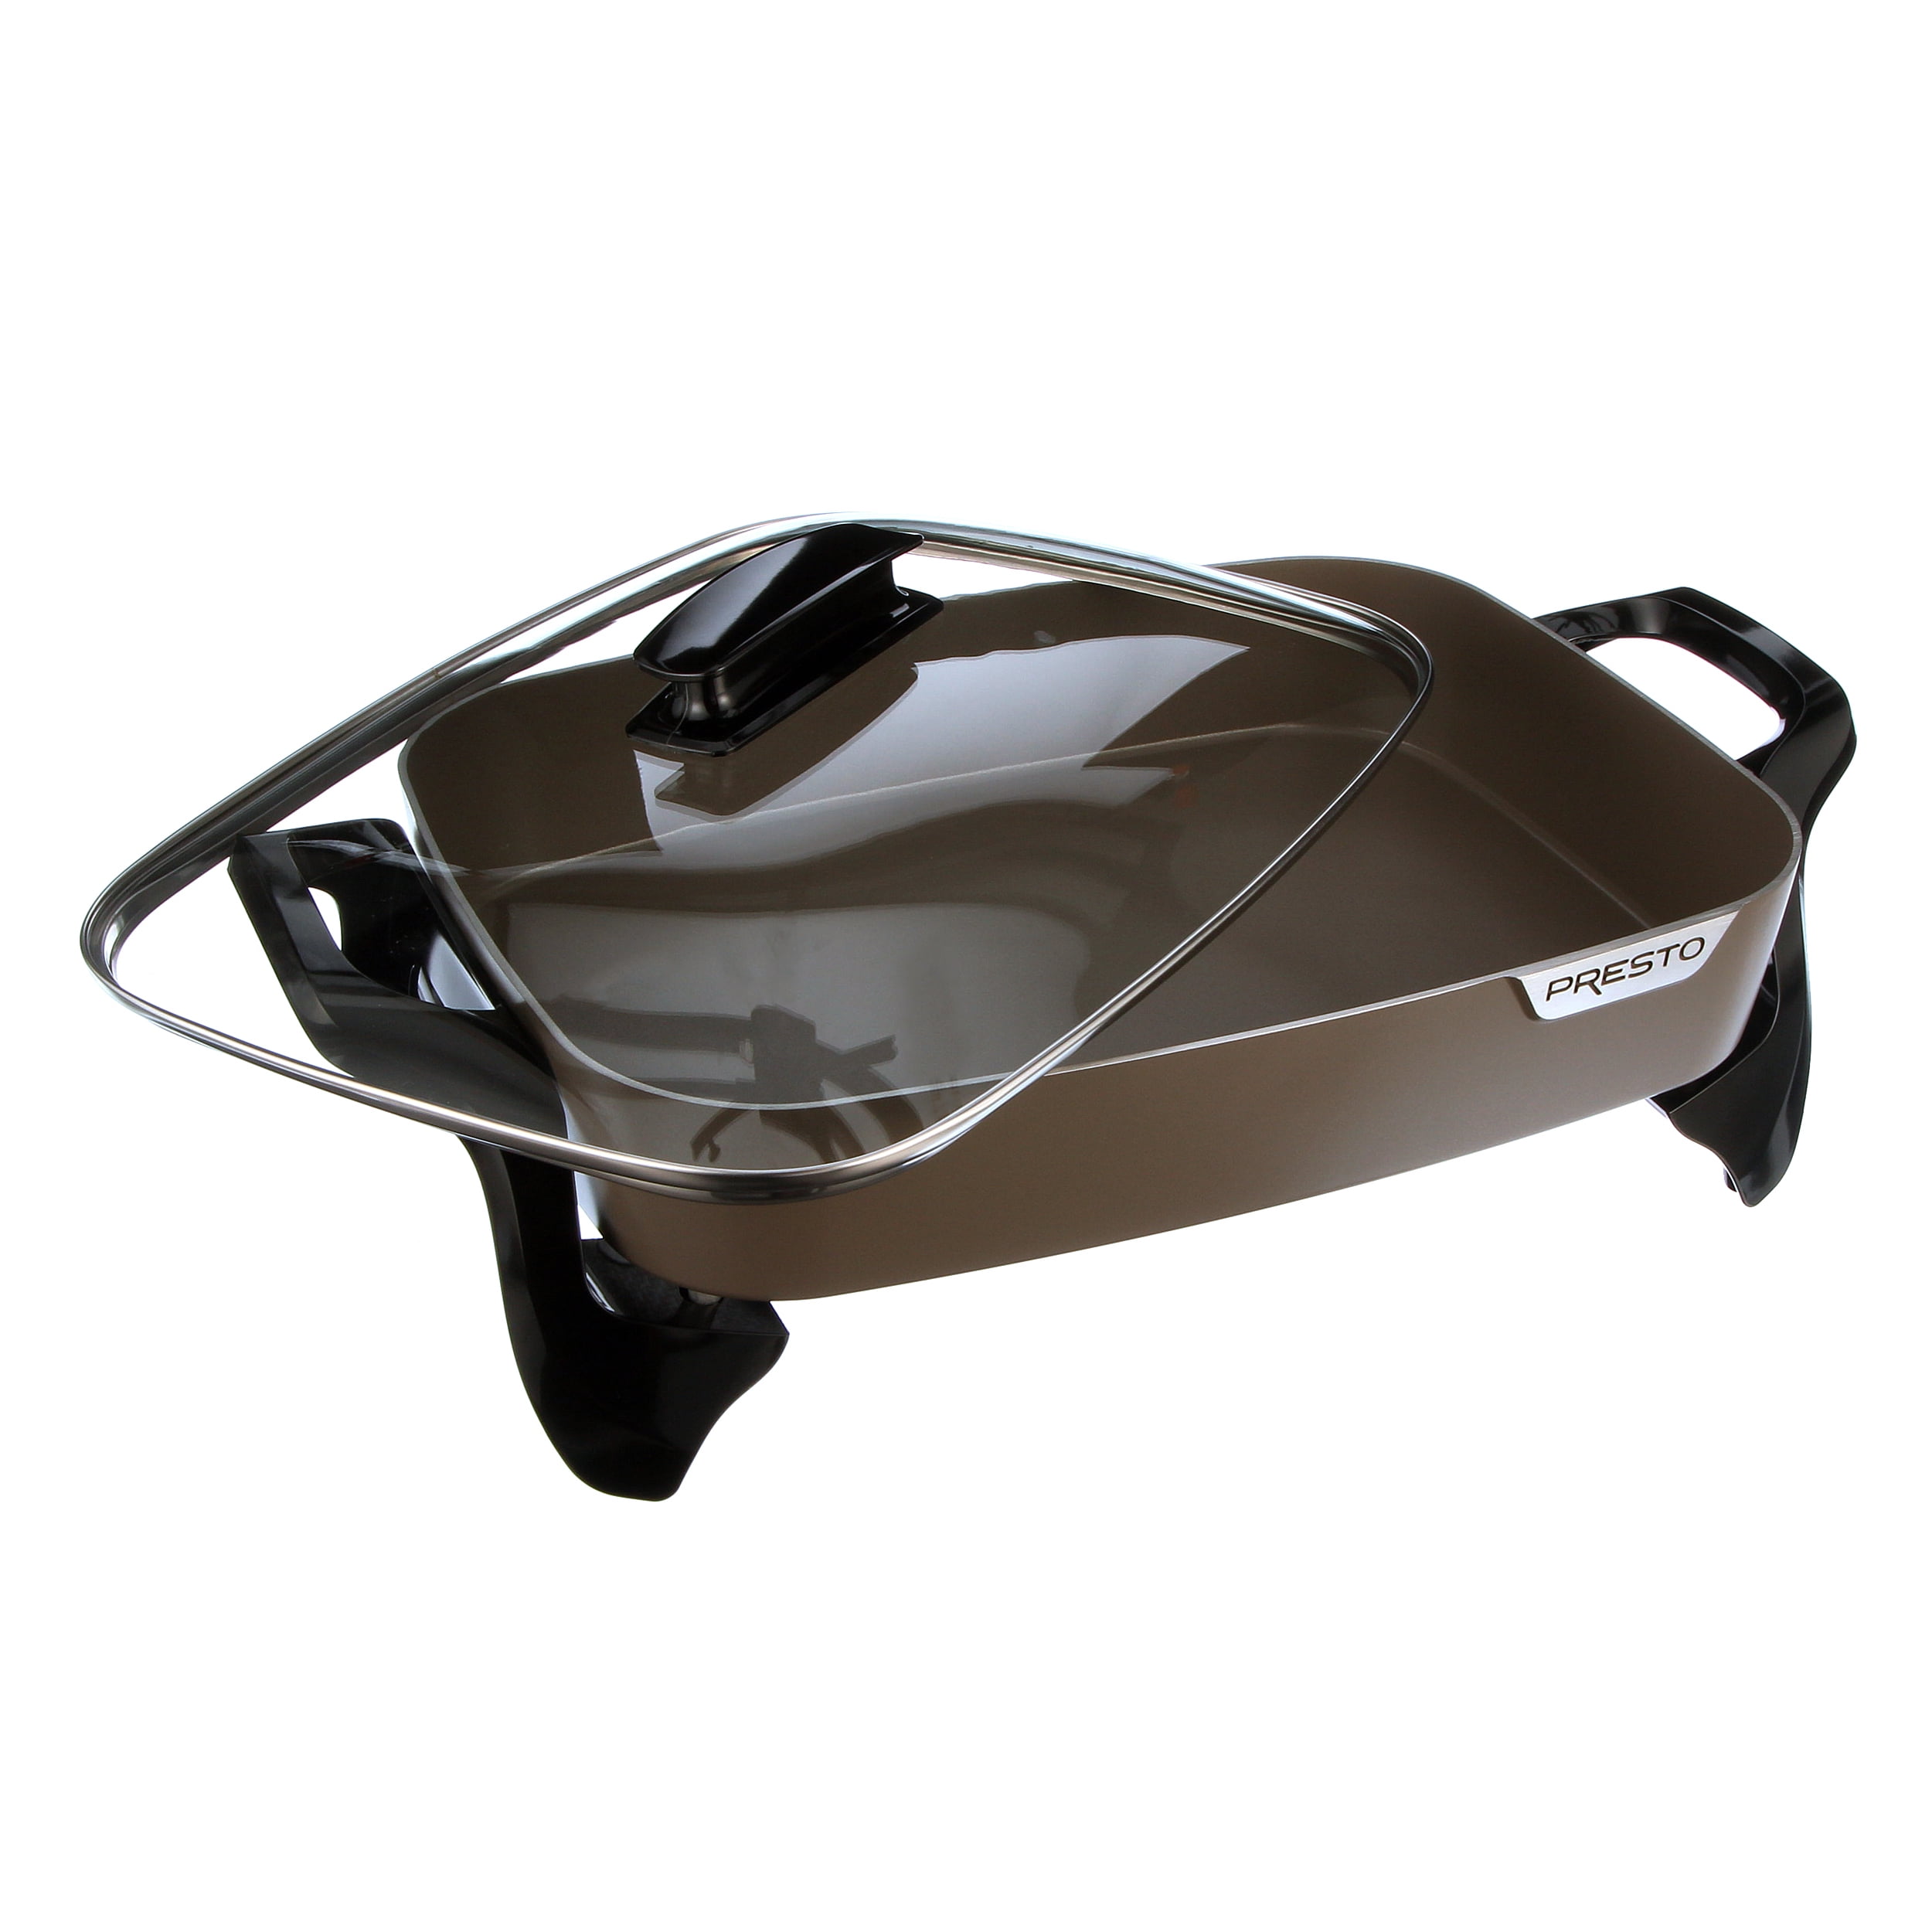 Presto 06852 16-Inch Electric Skillet with Glass Cover ️NEW IN